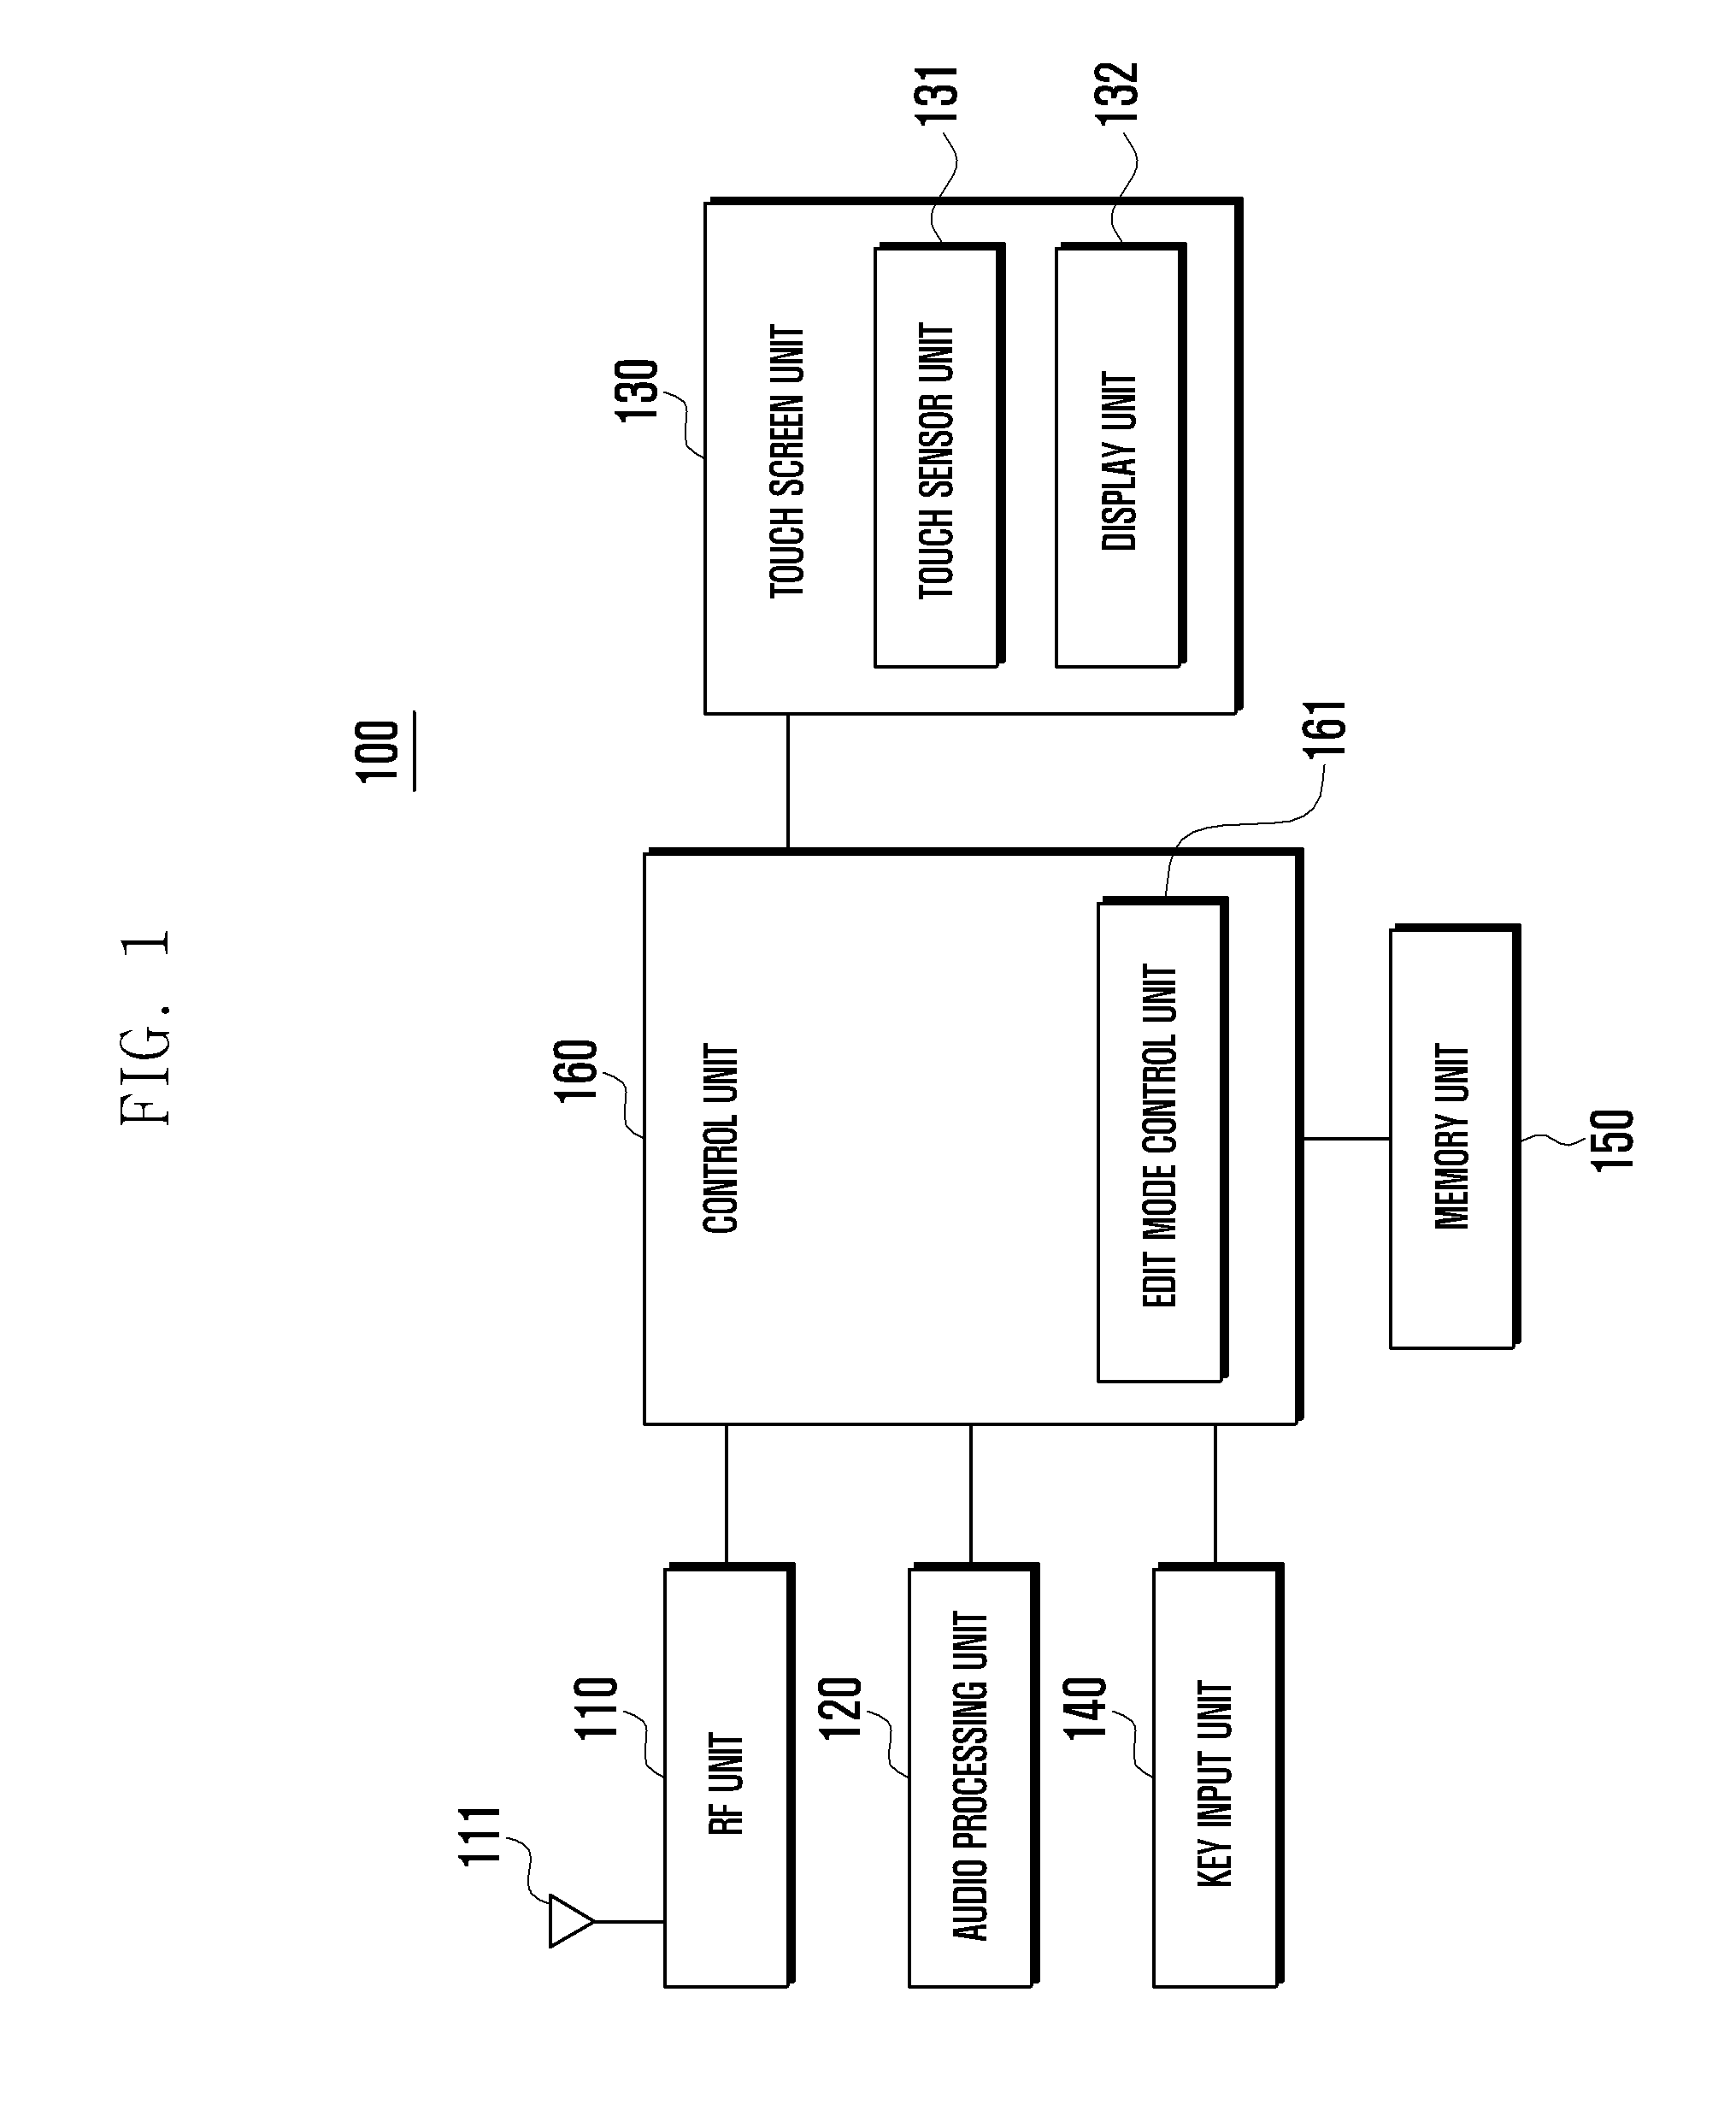 Method and apparatus for editing screen of mobile device having touch screen